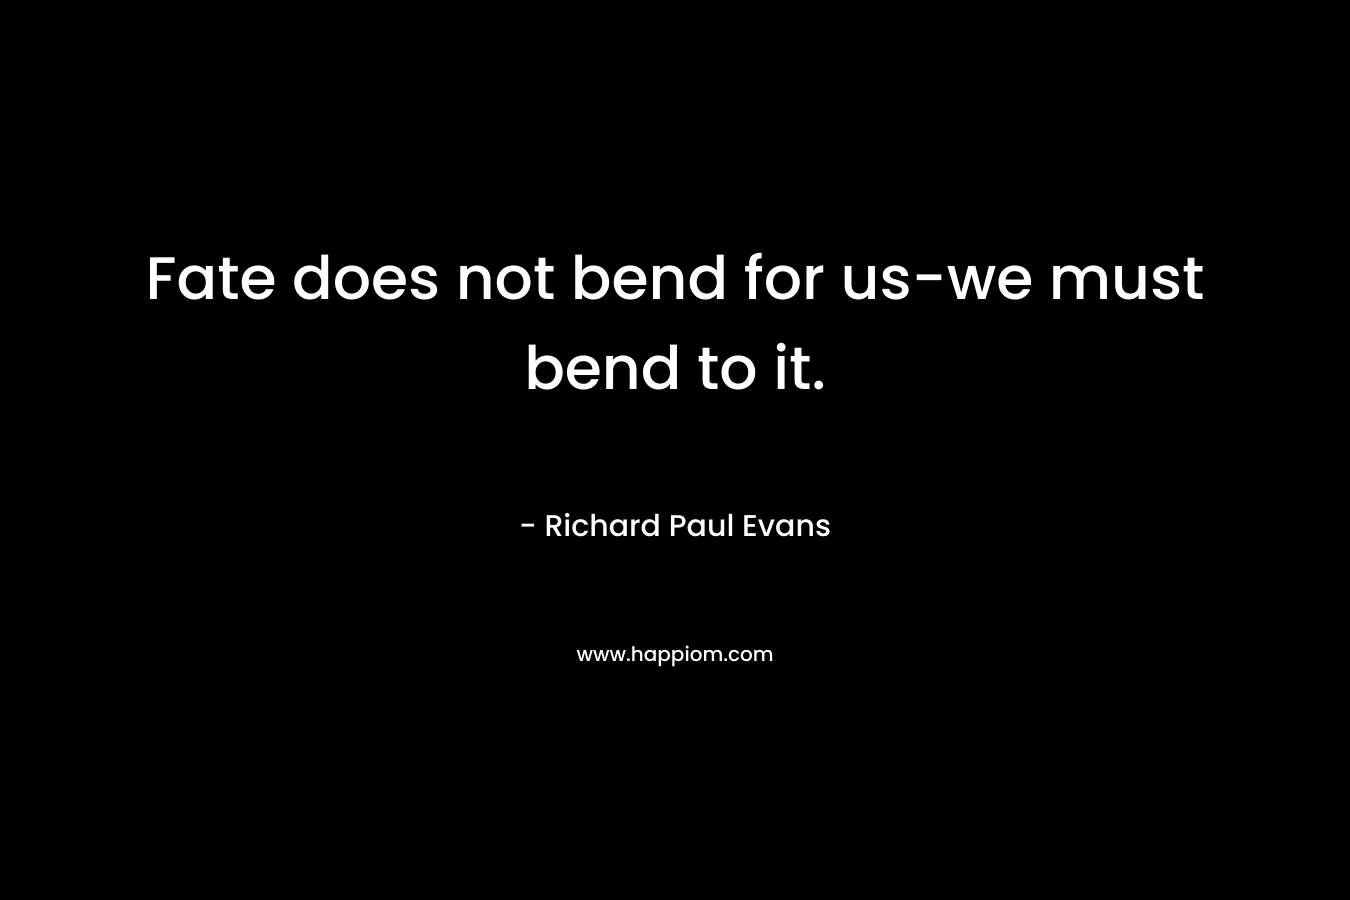 Fate does not bend for us-we must bend to it.